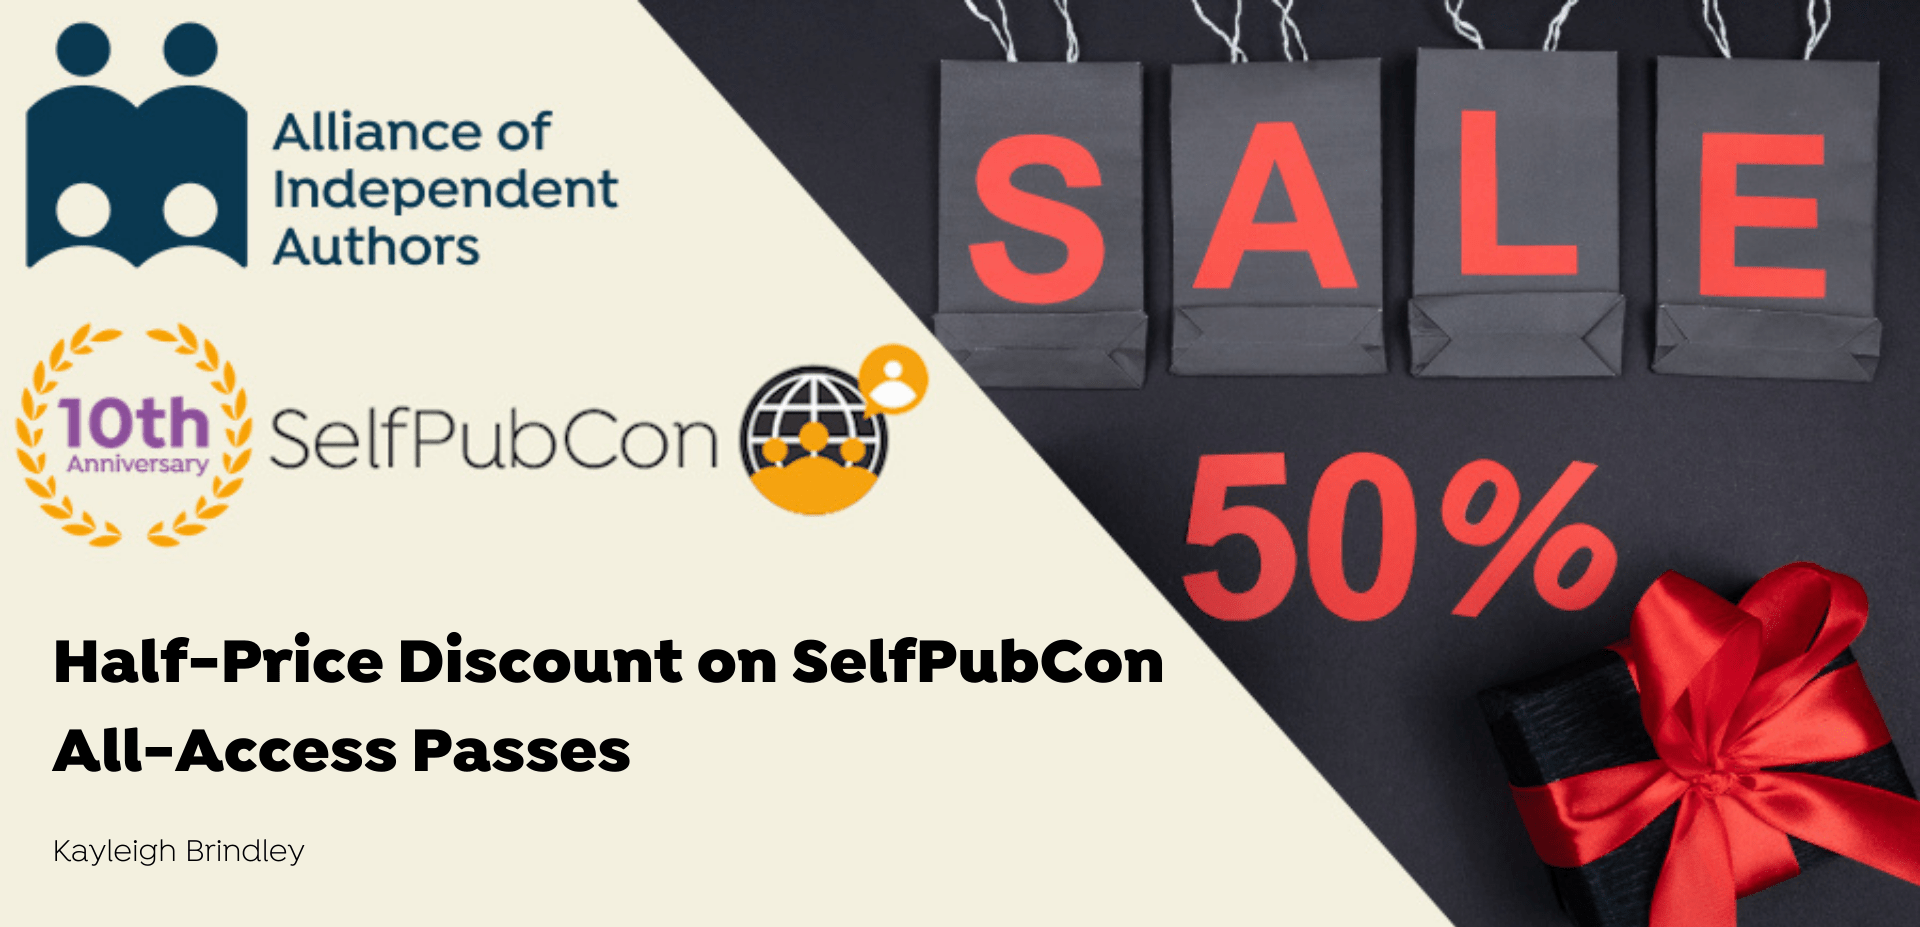 Half-Price Discount on SelfPubCon All-Access Passes